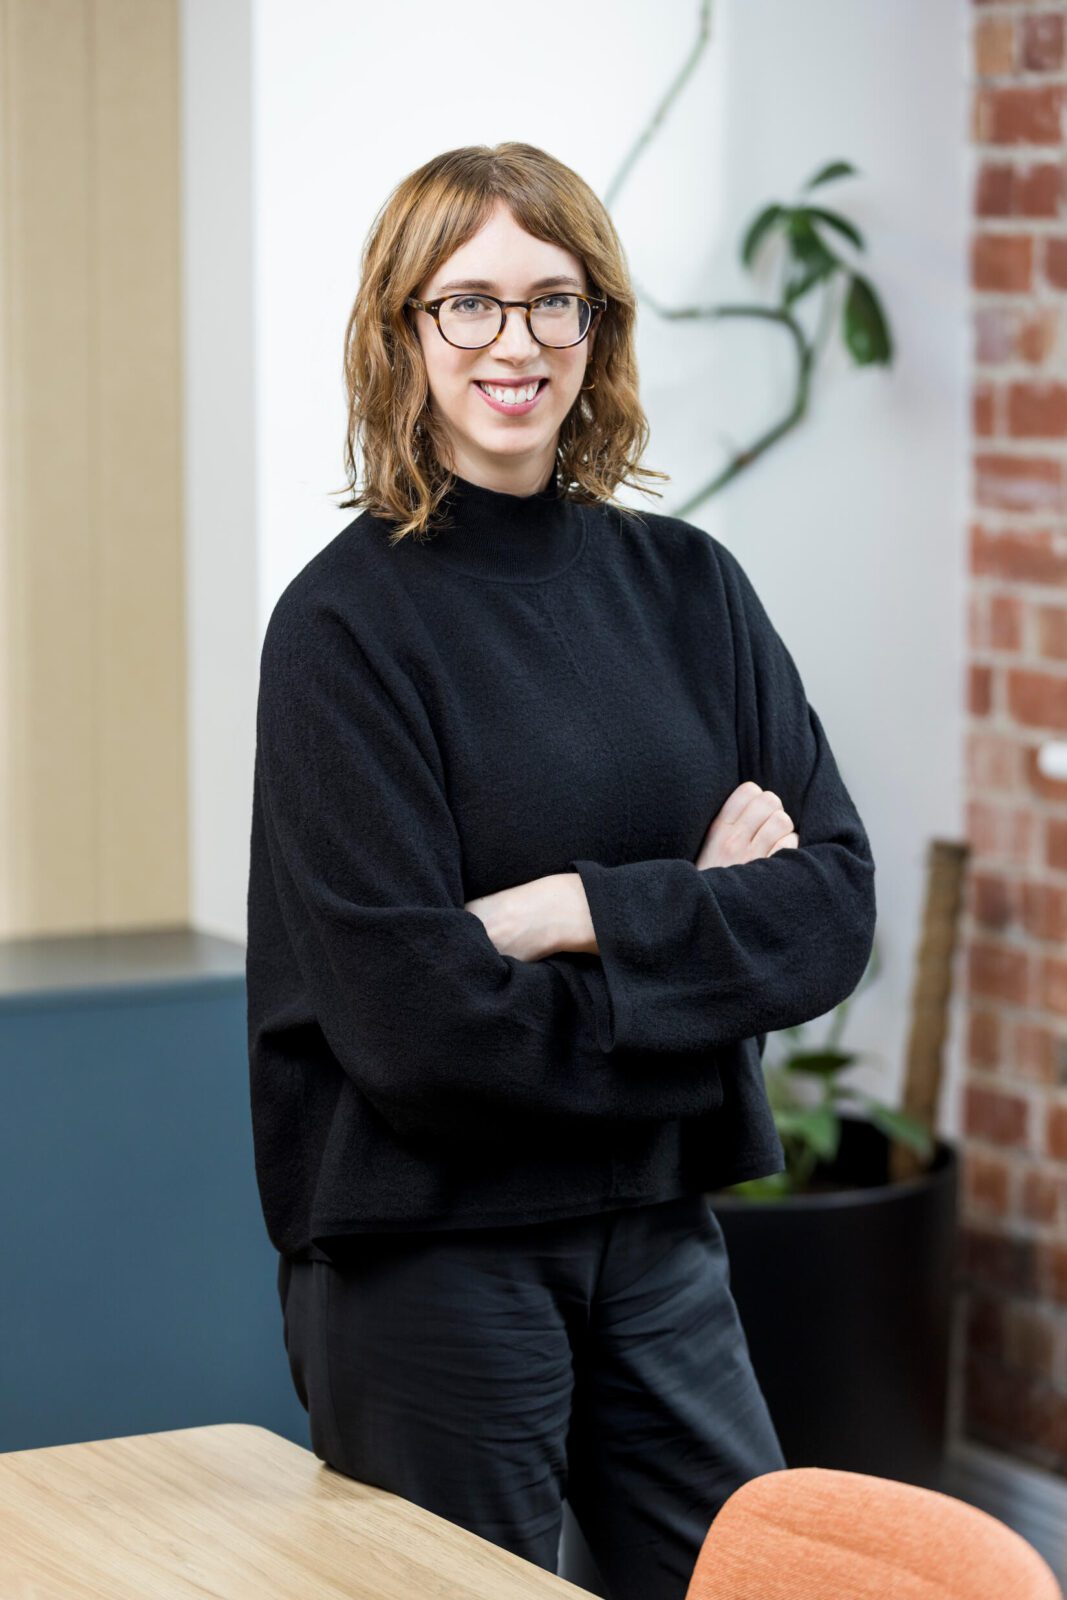 Woman in black high neck knit, tortoiseshell glasses, dark pants, stands cross-armed, smiling broadly to camera